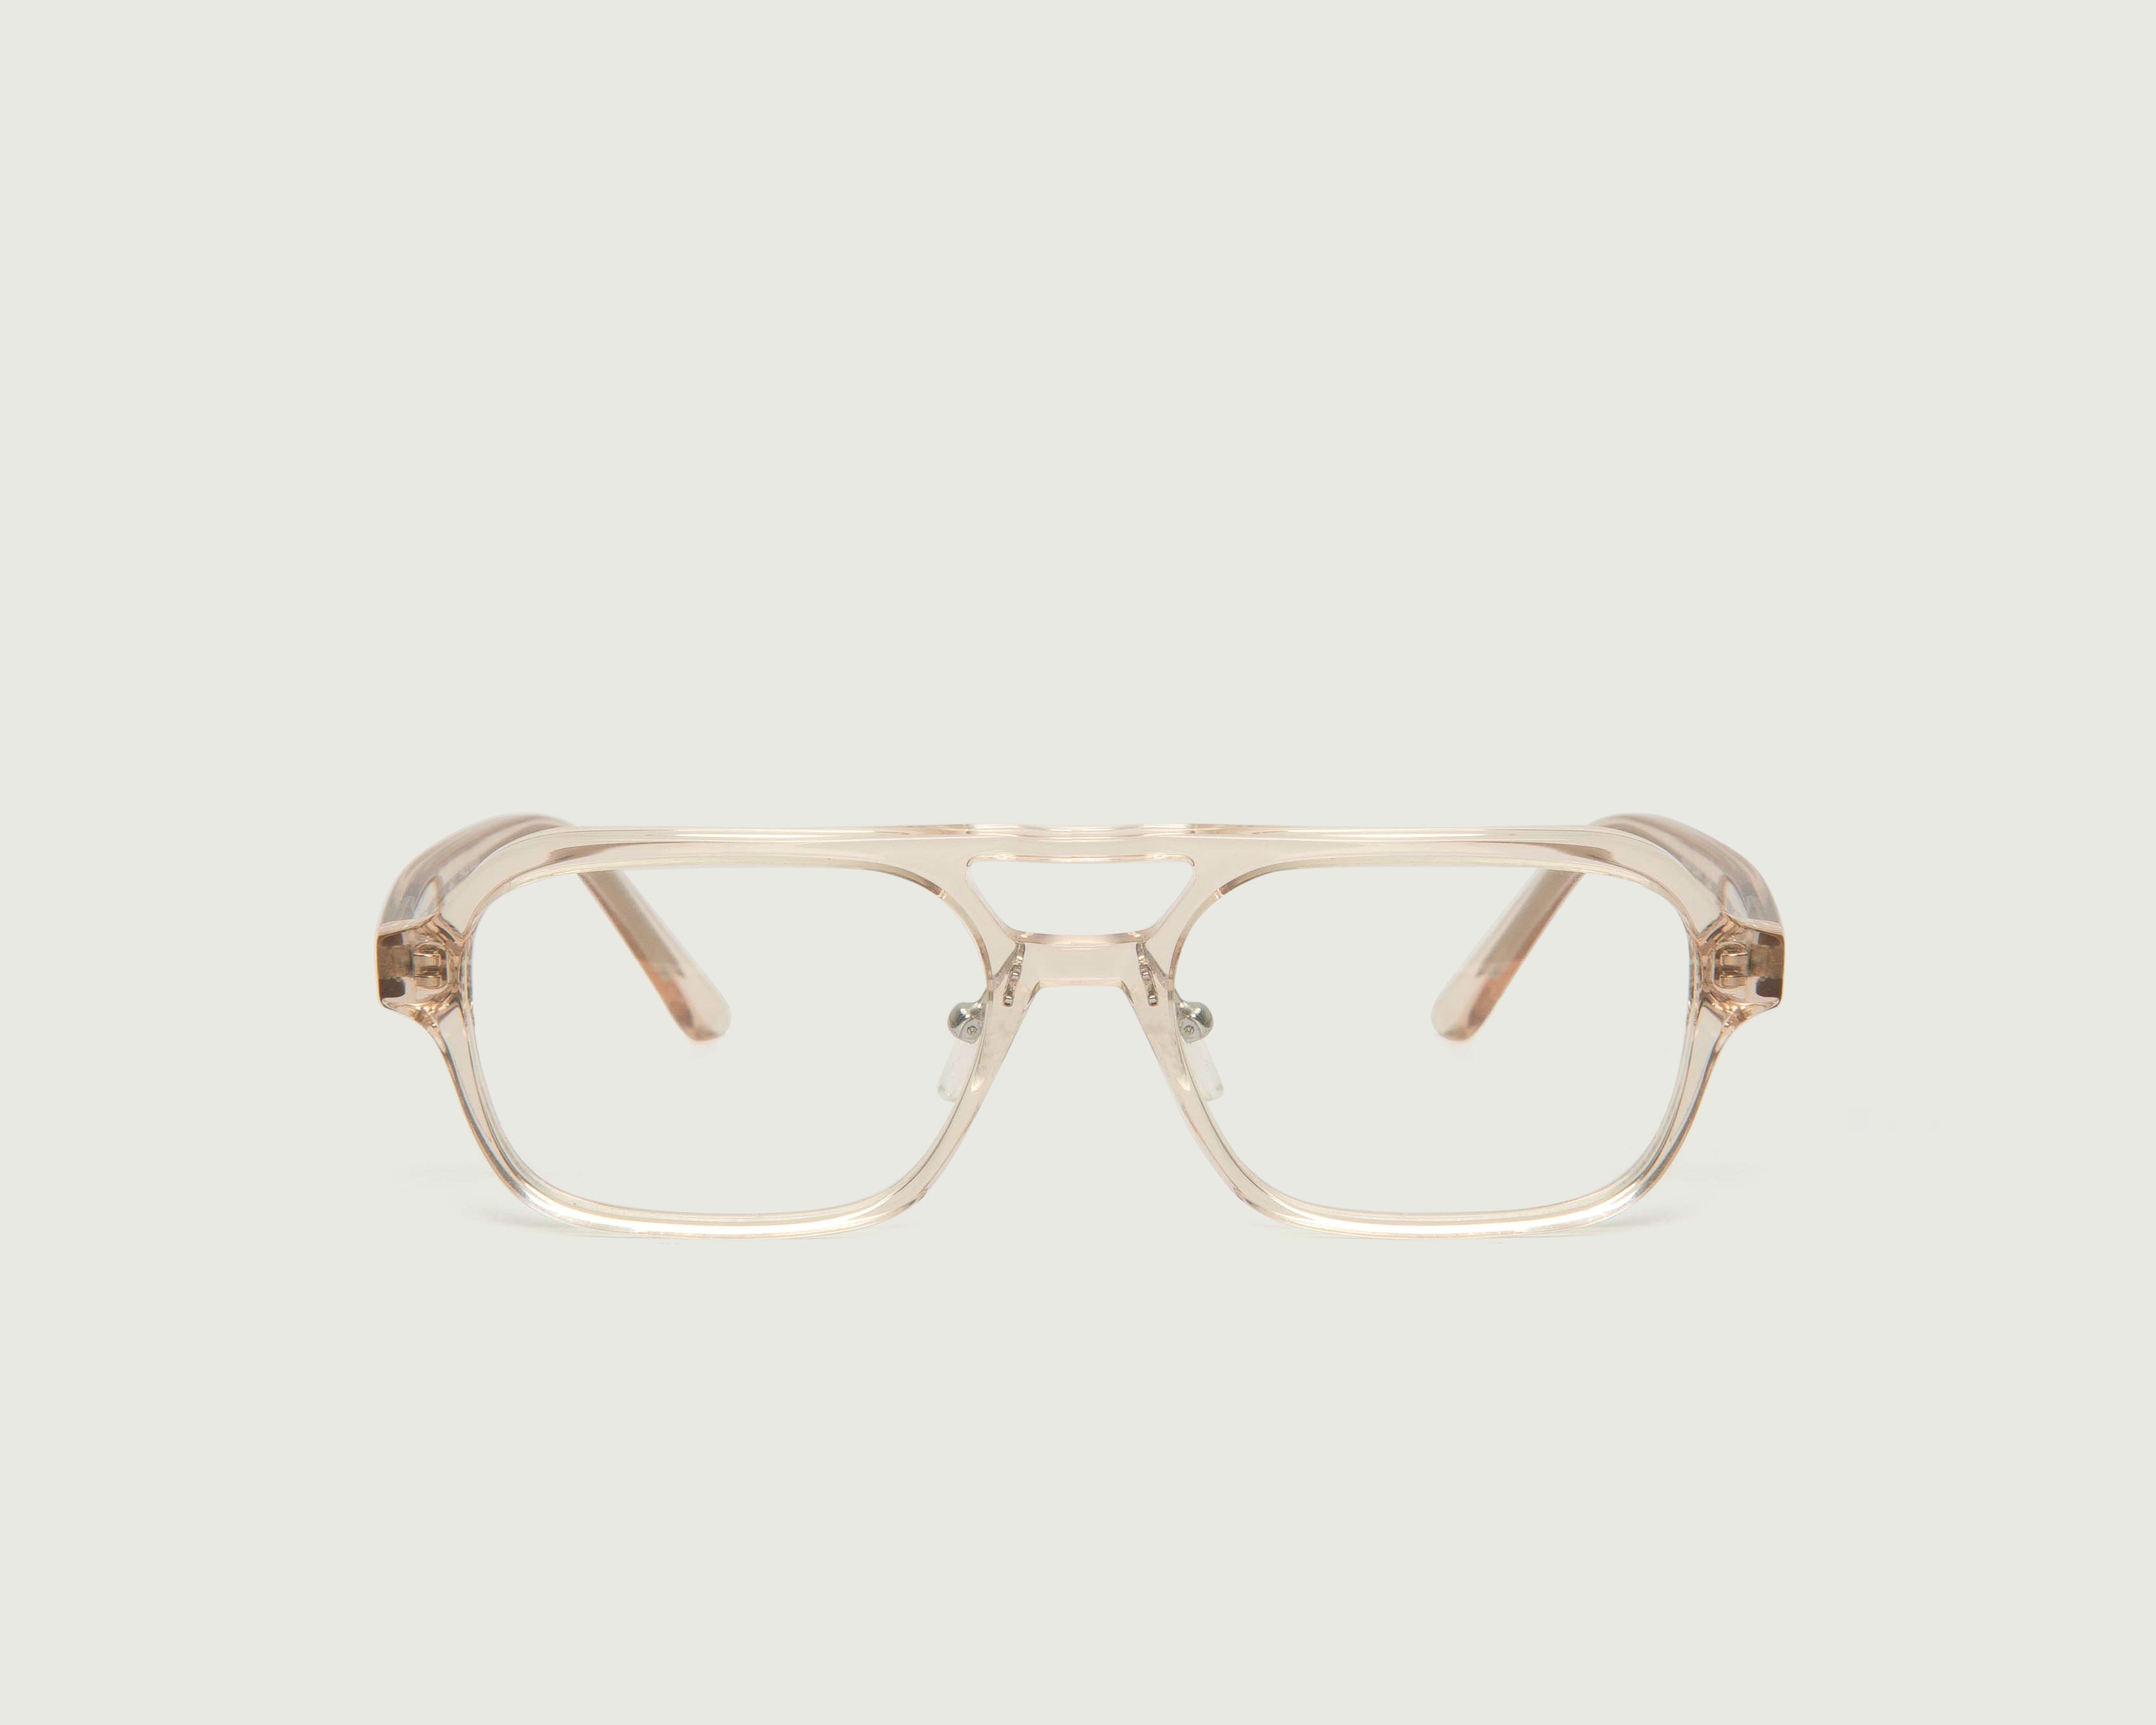 Pale Nude::Sly Eyeglasses pilot nude bioacetate front